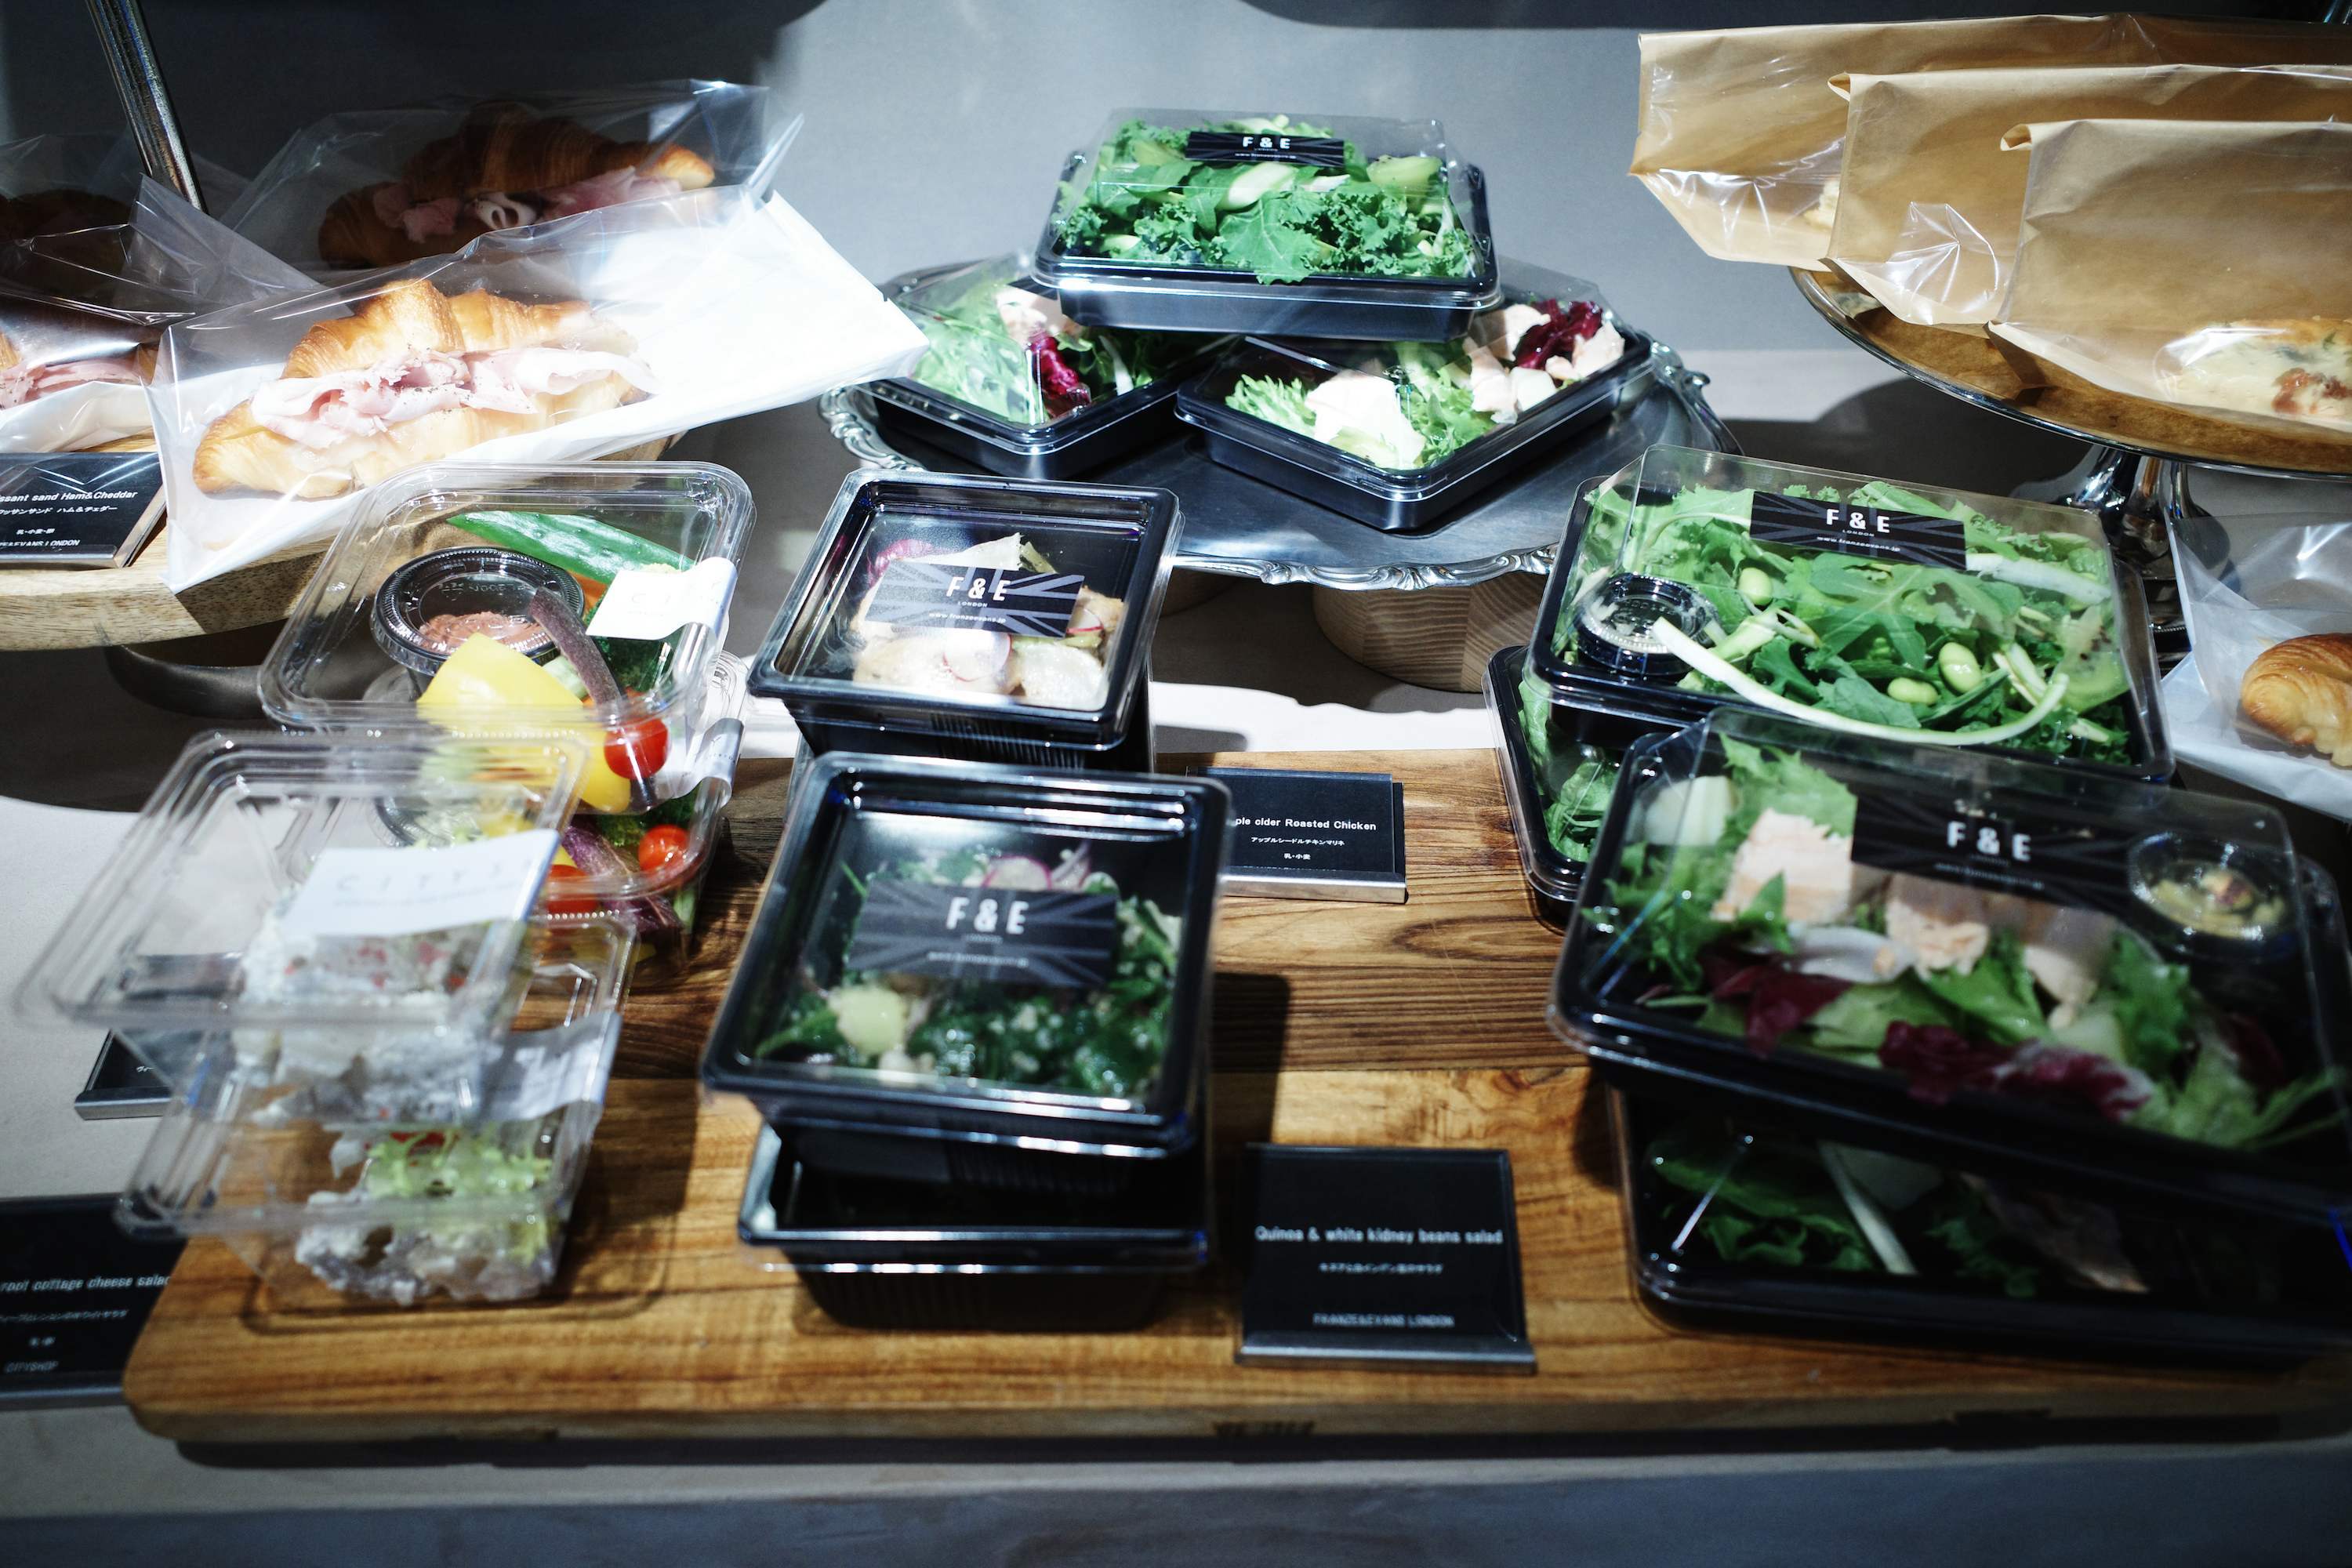 A variety of healthy food_salads alone are available! We can make your business life more fulfilling!